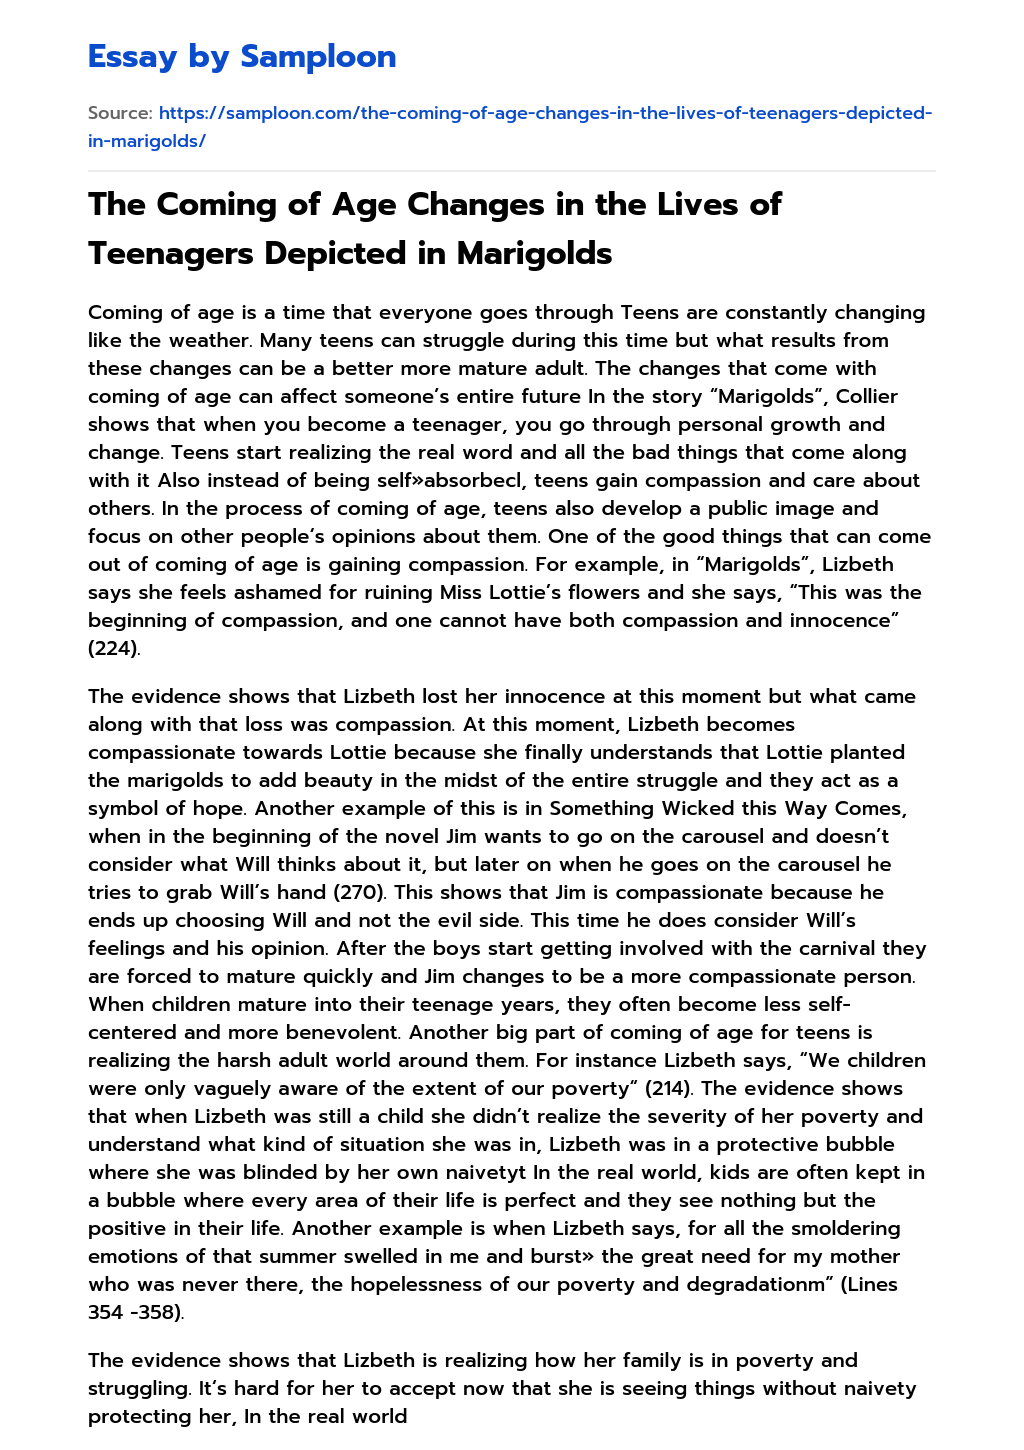 The Coming of Age Changes in the Lives of Teenagers Depicted in Marigolds essay